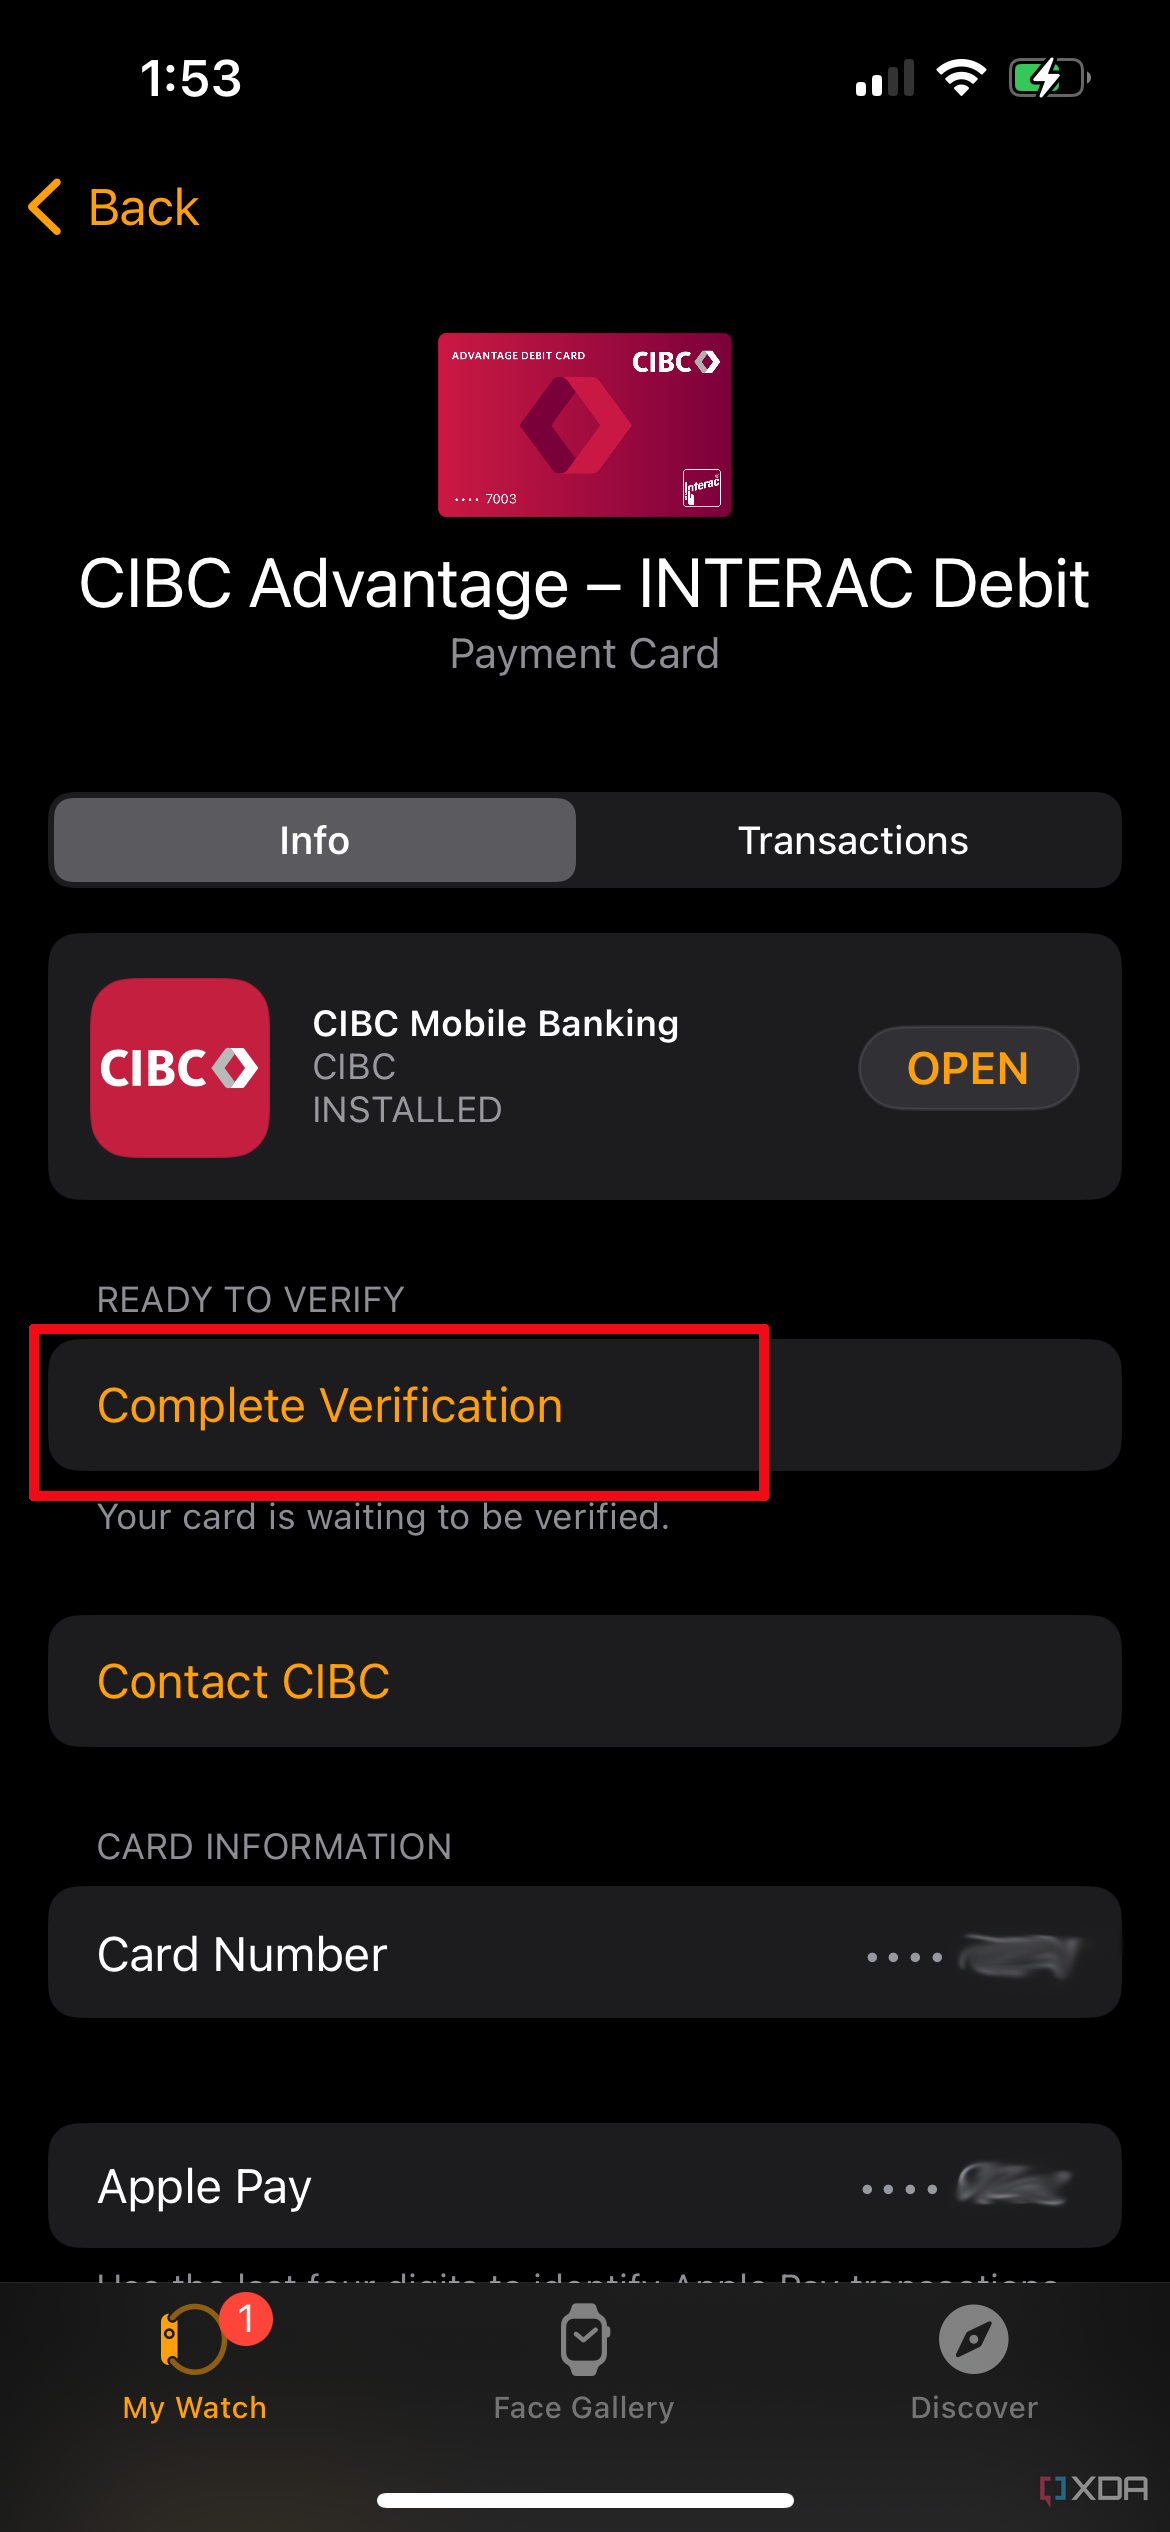 New card page in Apple Watch app showing Compete Verification highlighted